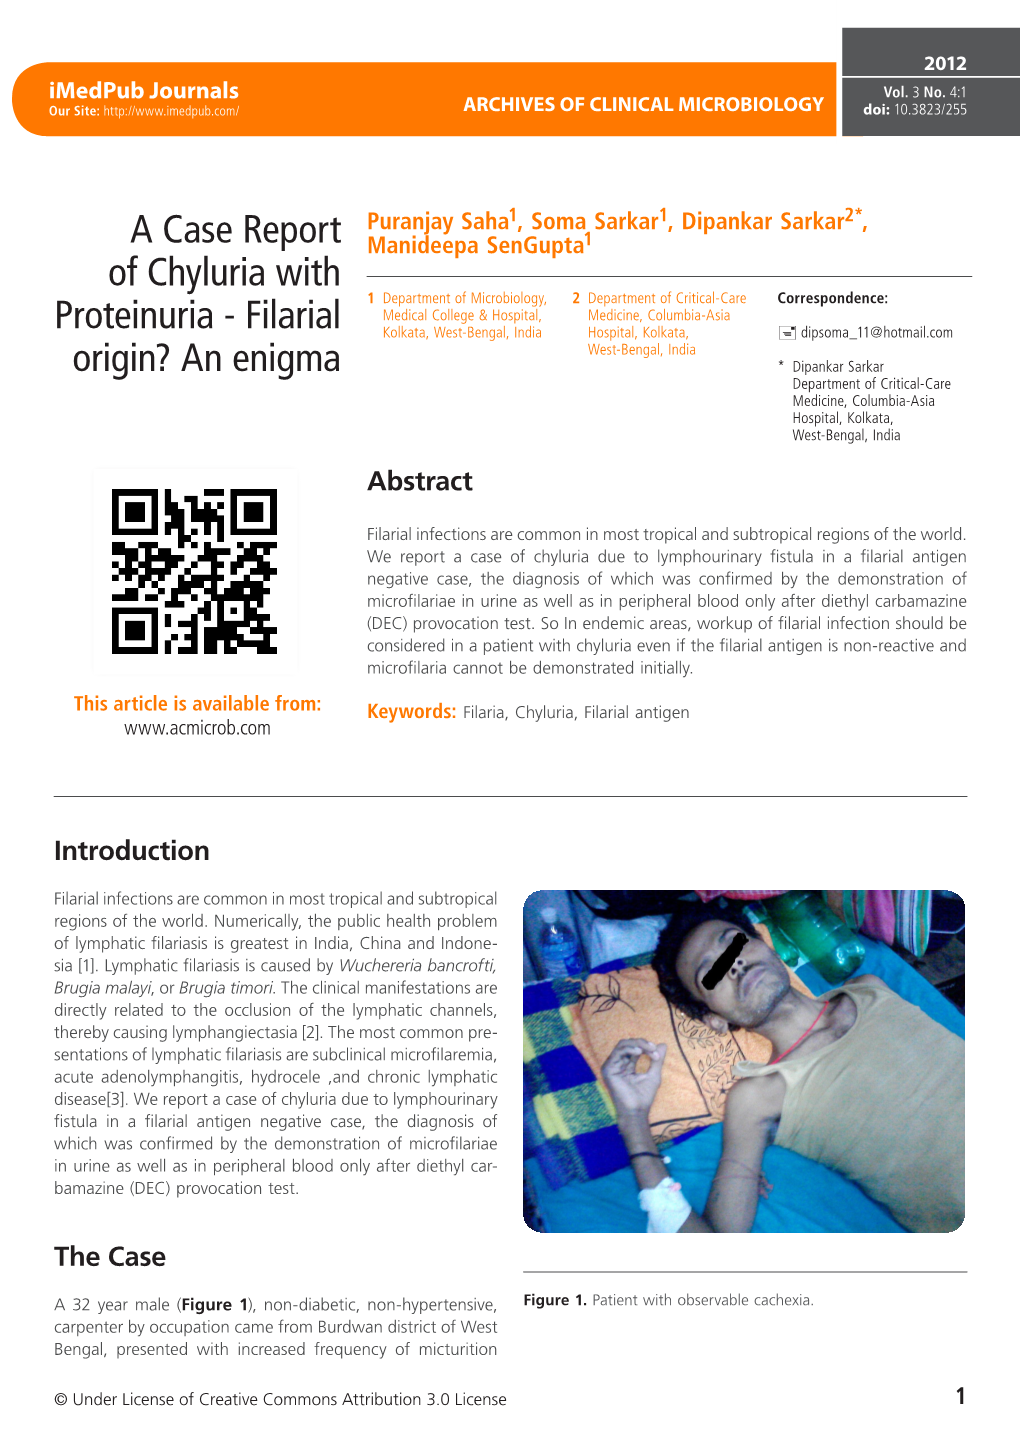 A Case Report of Chyluria with Proteinuria